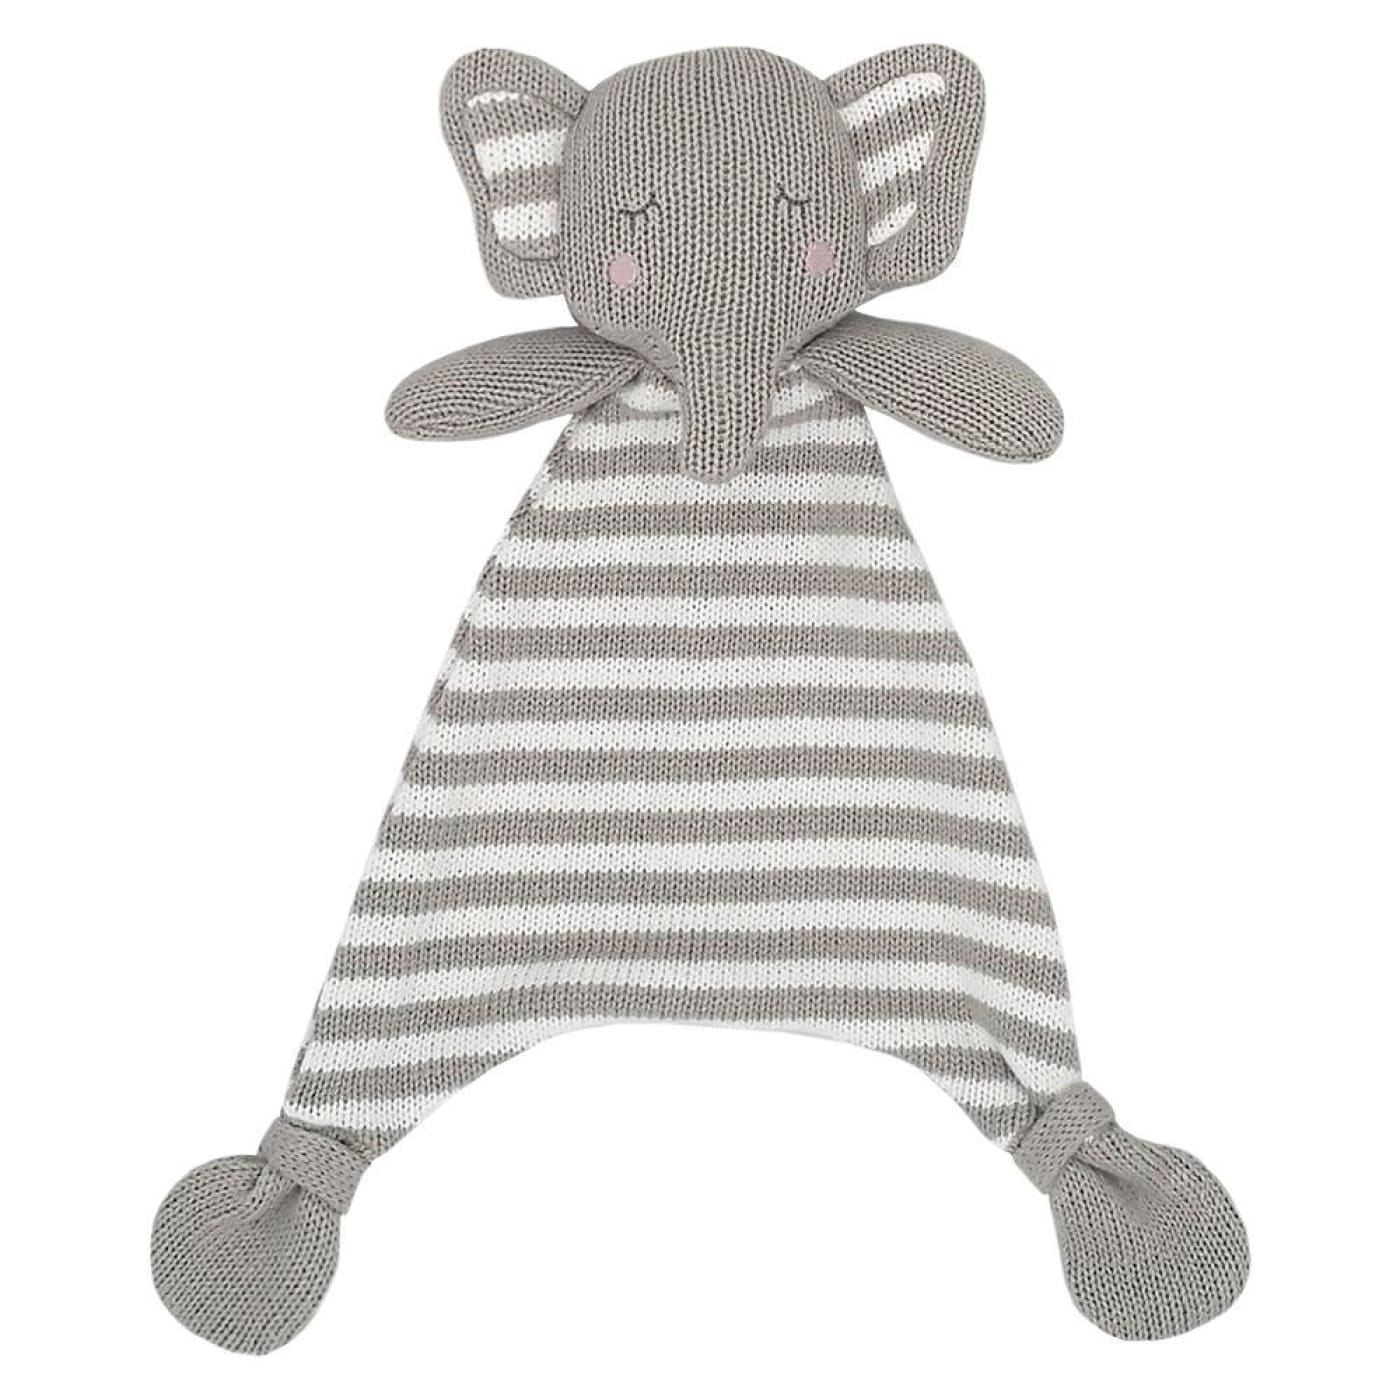 Living Textiles Knit Security Blanket - Eli The Elephant - TOYS & PLAY - BLANKIES/COMFORTERS/RATTLES